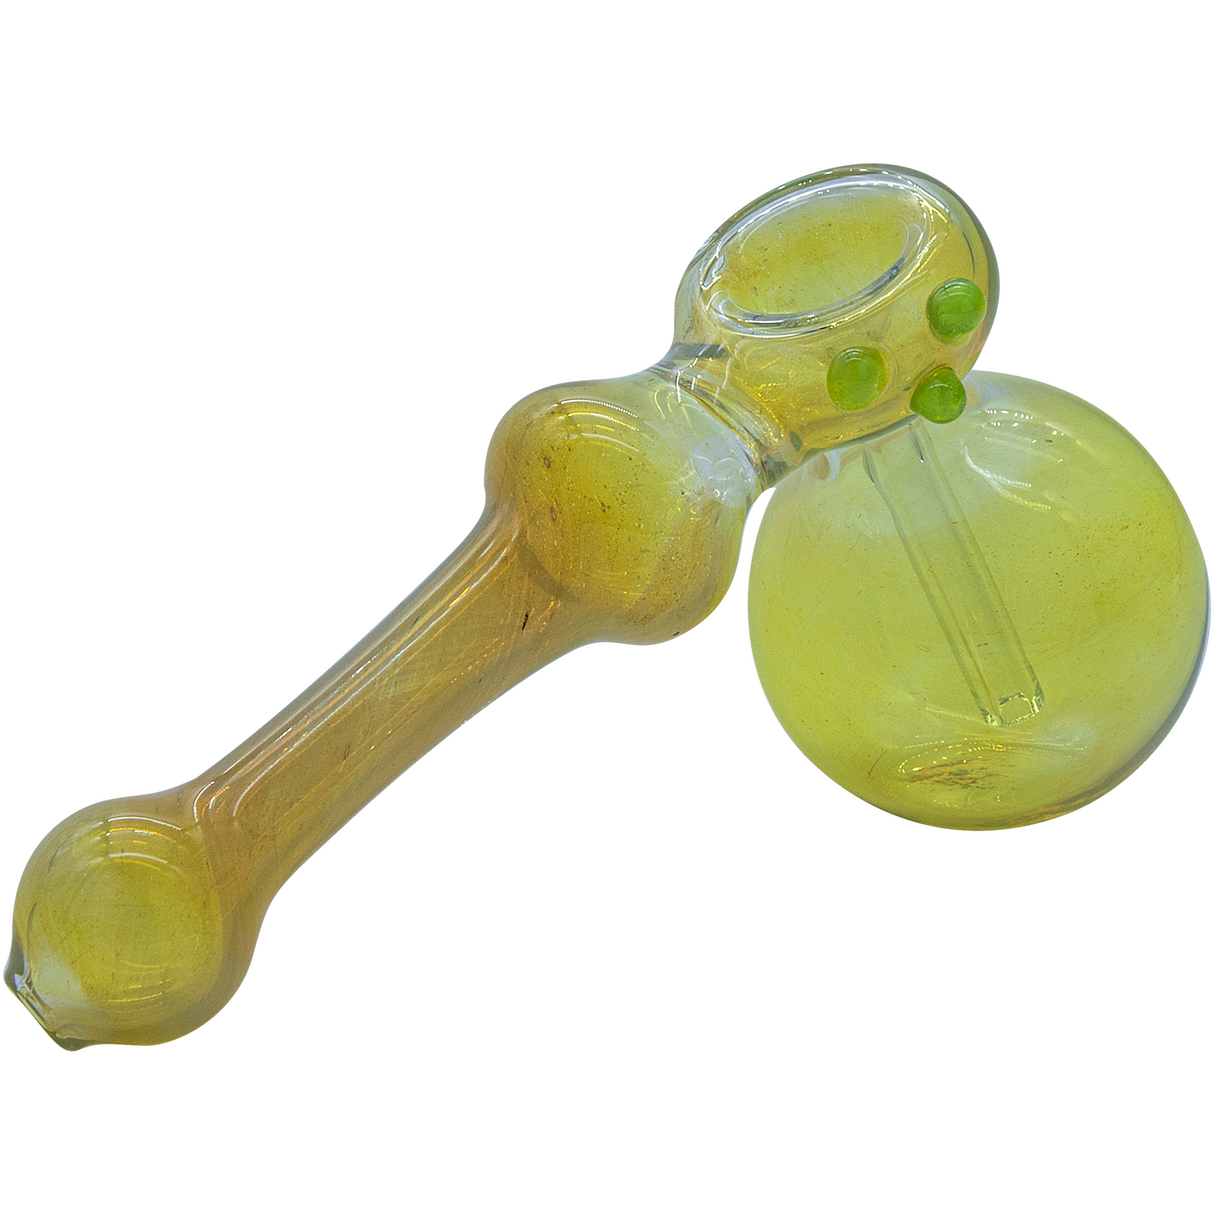 LA Pipes "Silver Hammer" Fumed Hammer Bubbler Pipe in Yellow, 6" Borosilicate Glass, USA Made